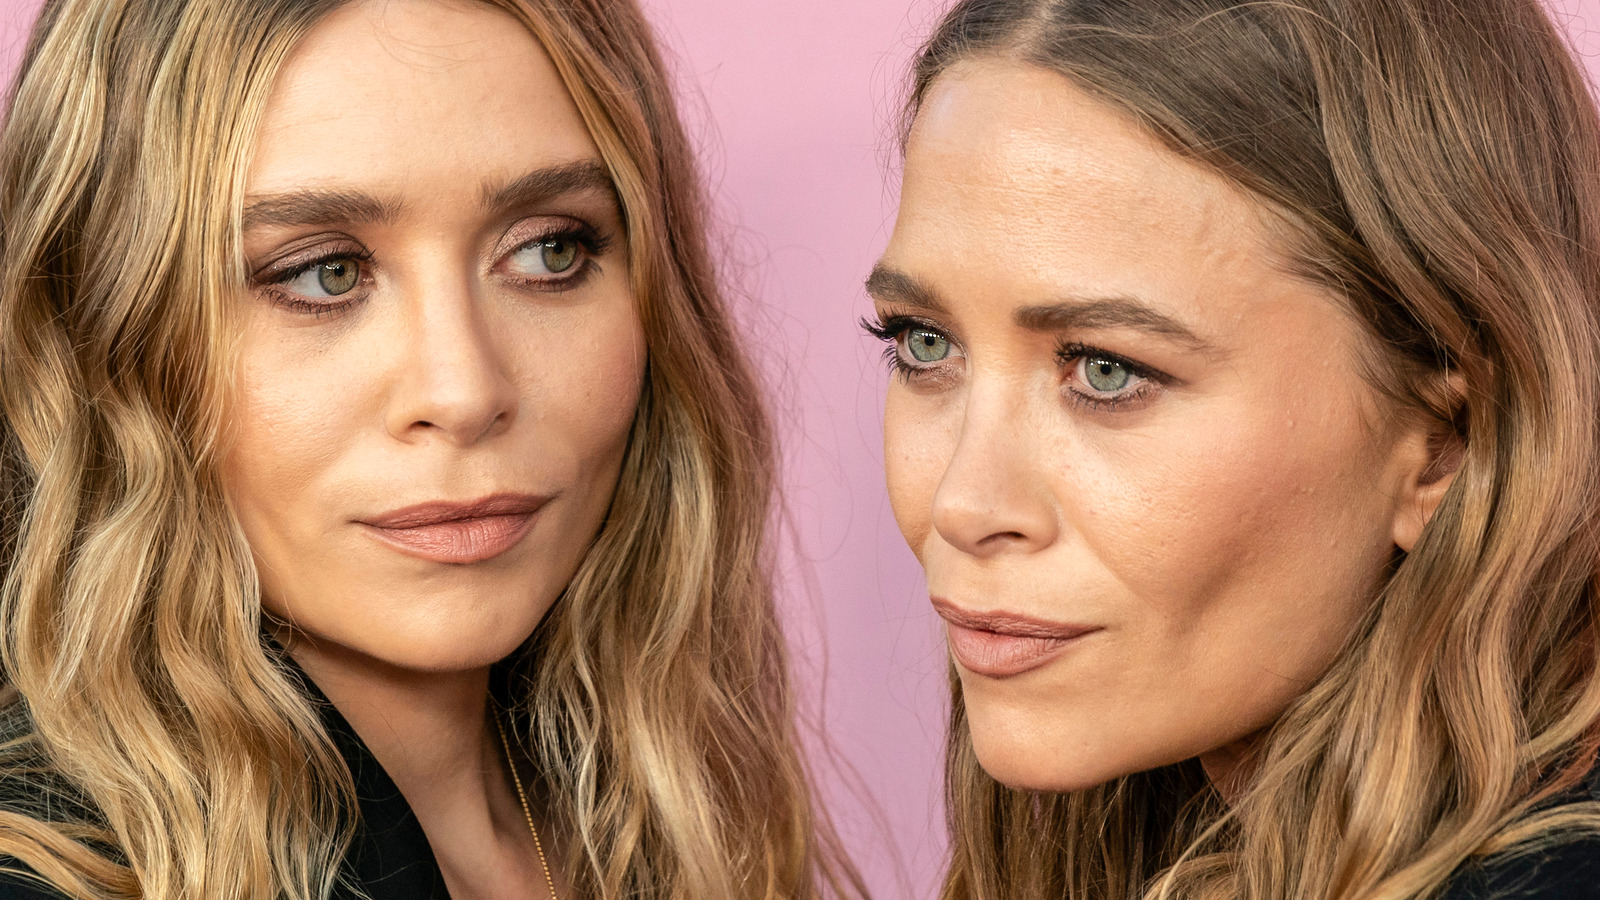 Why Ashley Olsen and Mary-Kate Olsen Do Not Interview Anymore